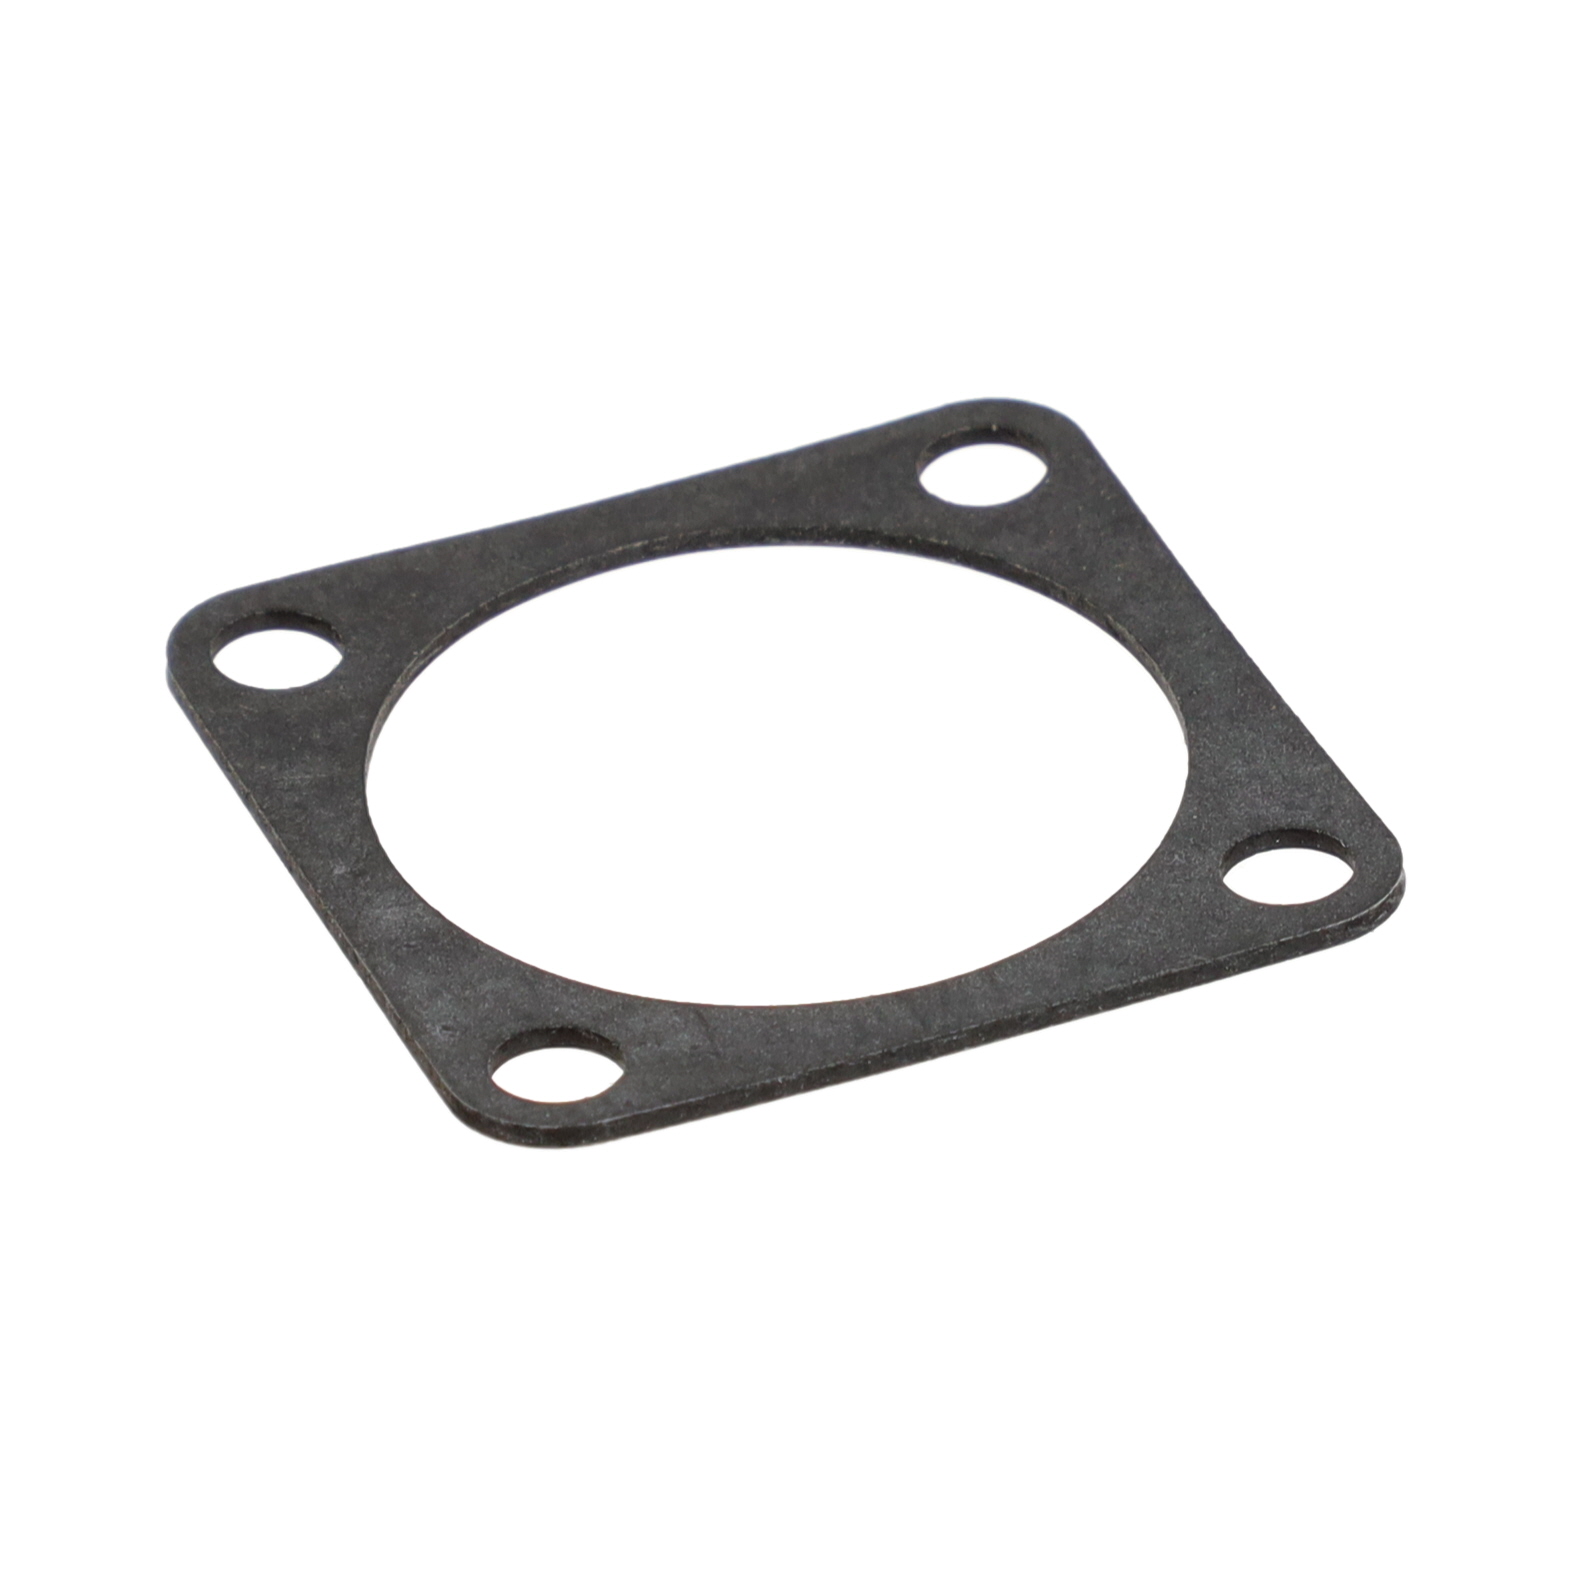 【075-8516-000】CONN GASKET FOR 18